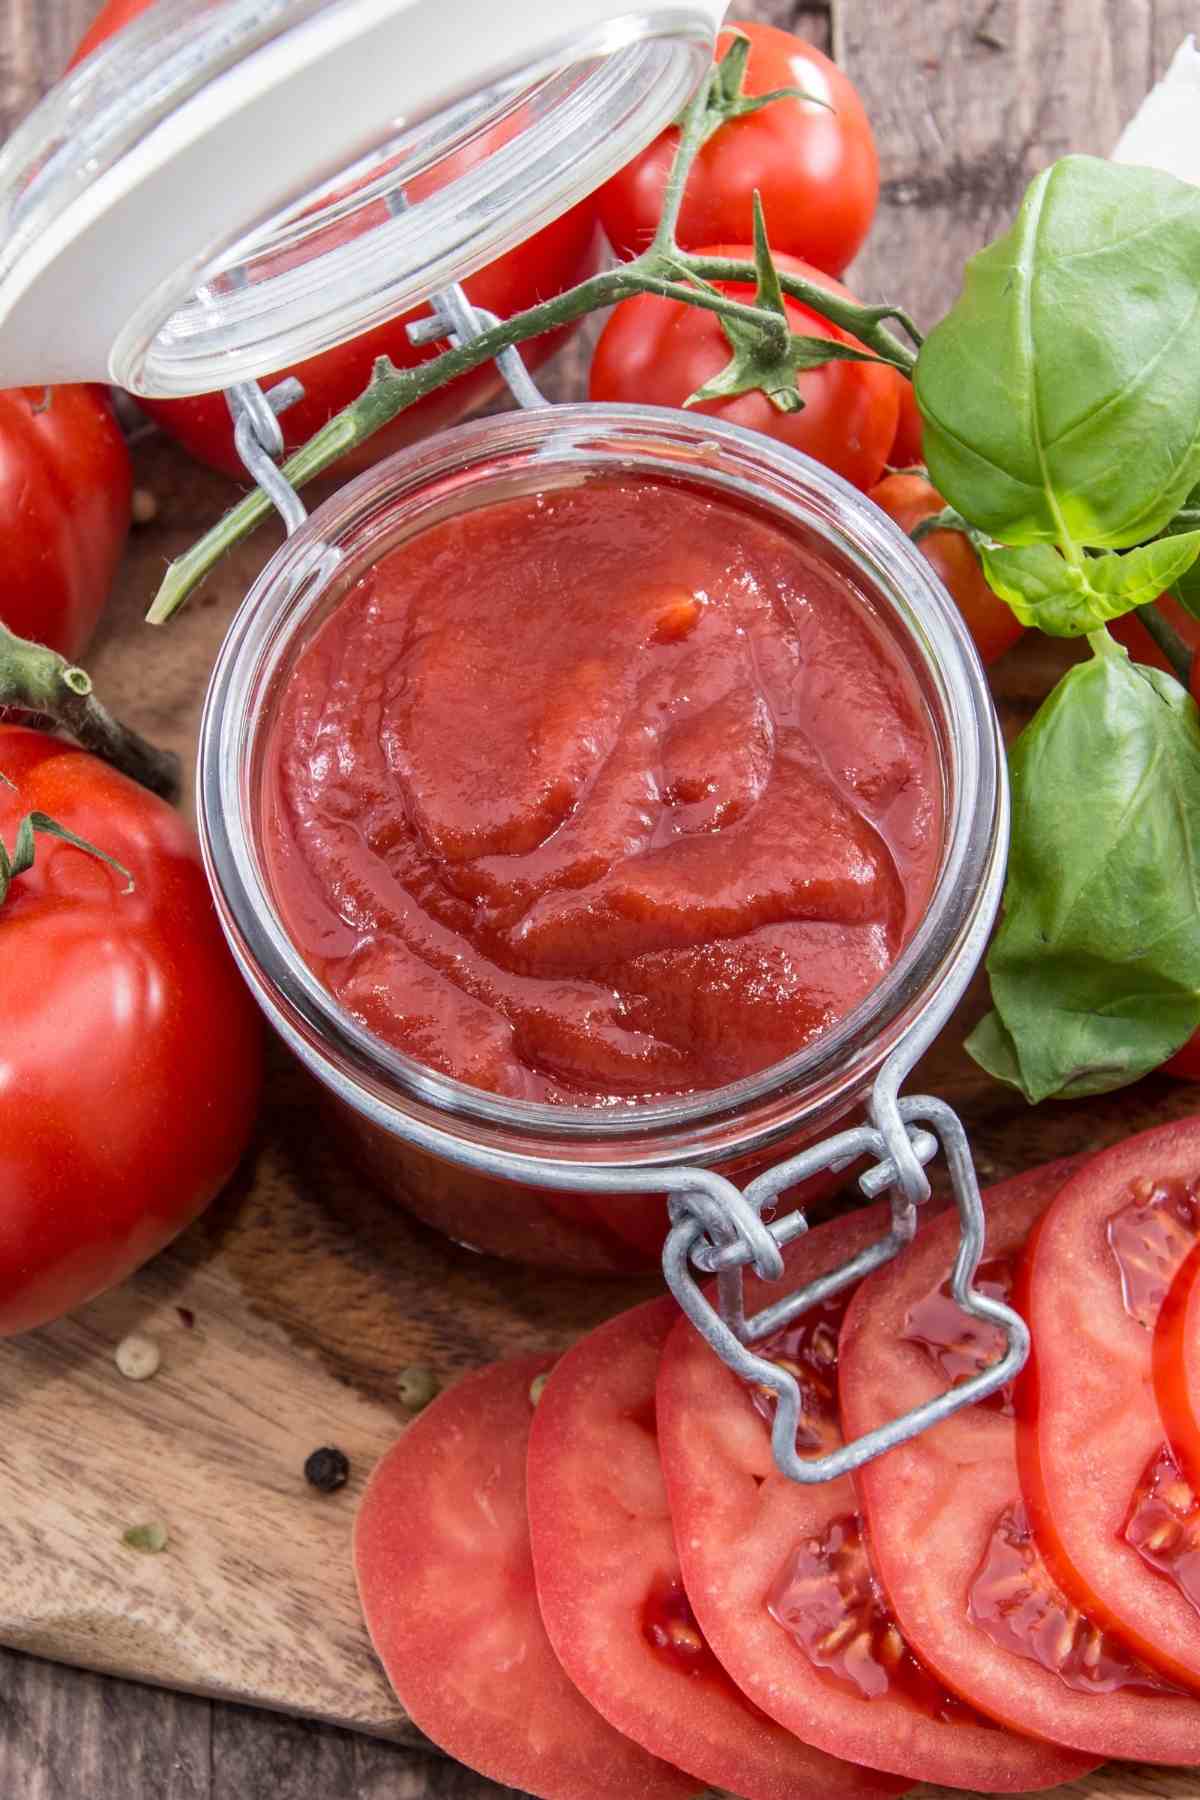 Homemade tomato sauce is easy to make, and a delicious base for many dishes. If your tomato sauce is a bit too acidic, this post offers some easy ways to correct it.